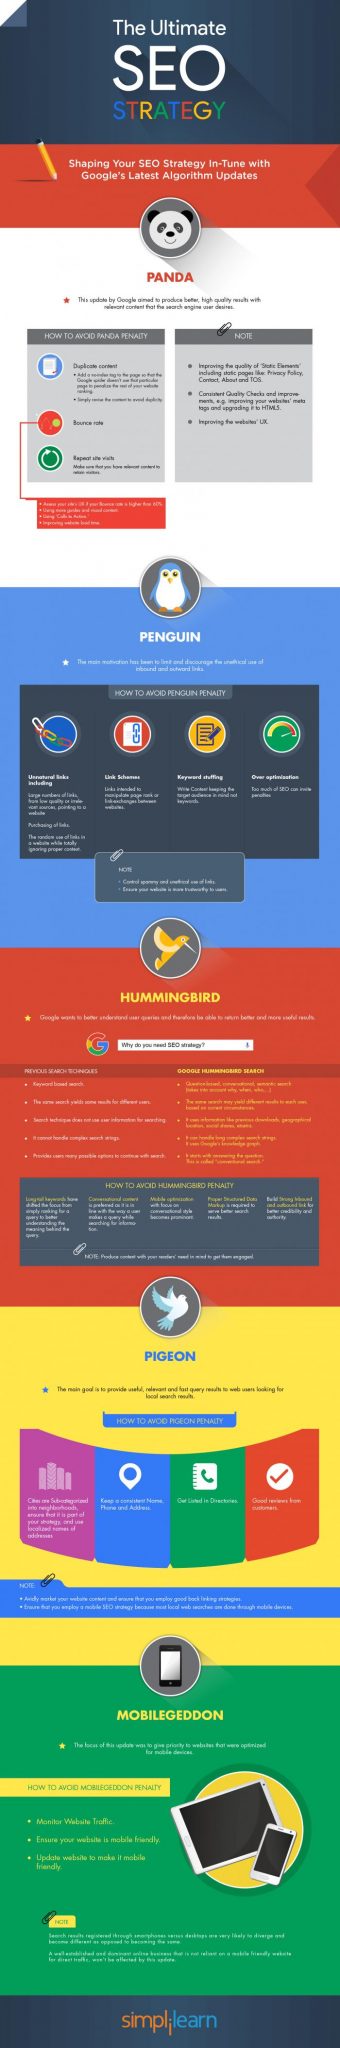 SEO-strategy-infographic-700x4215